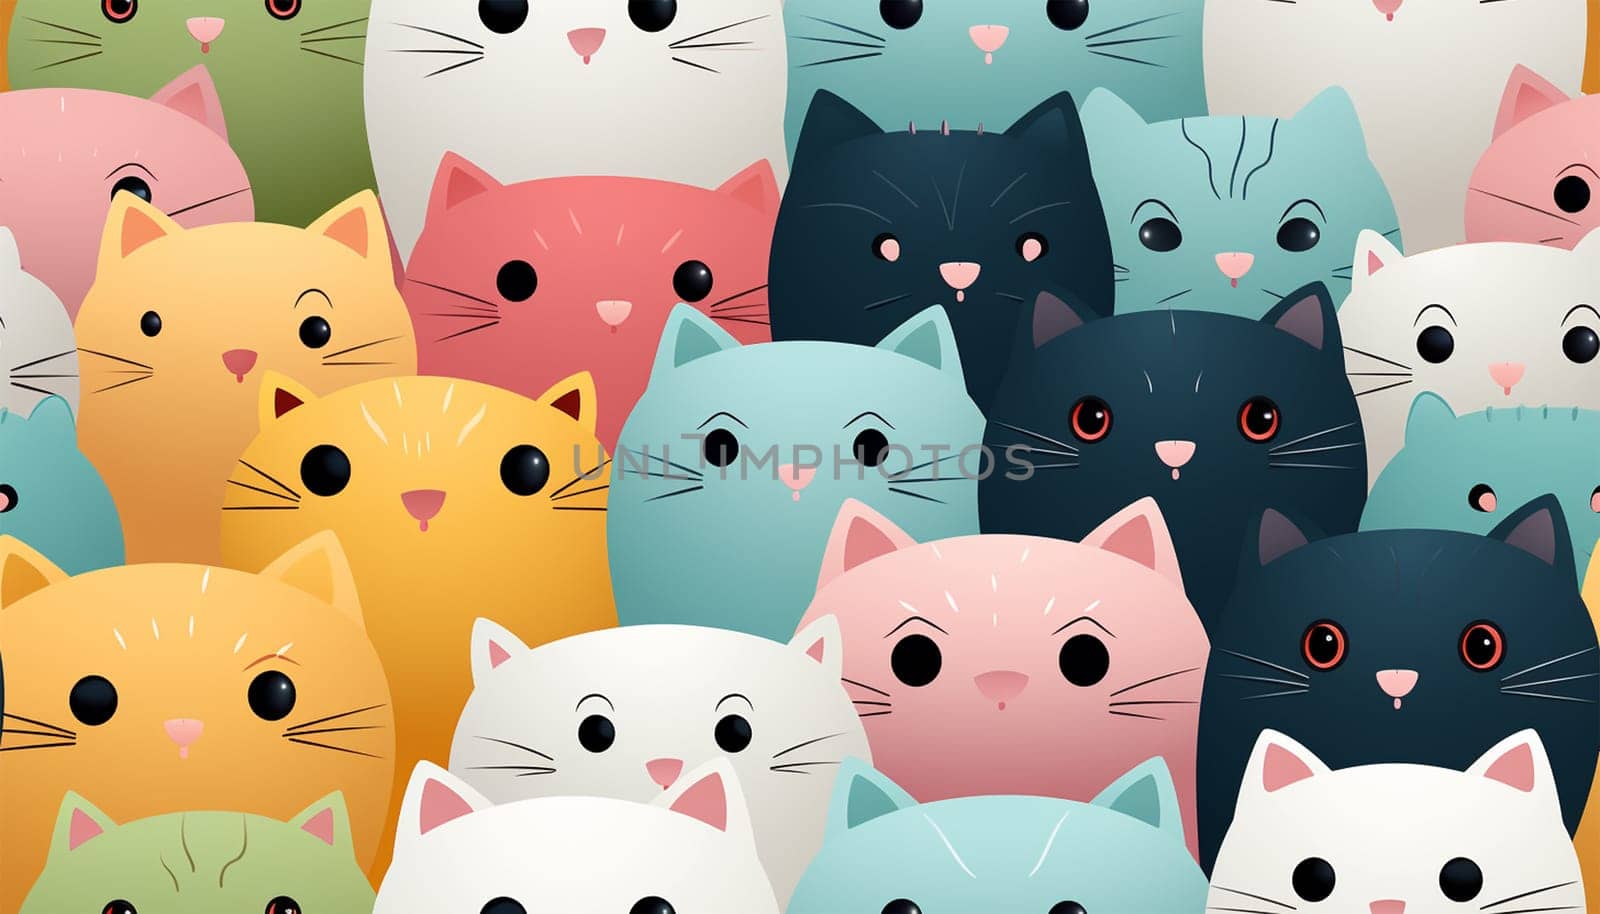 Cute cats Kawaii kittens funny .Seamless pattern of cute colorful cat cartoon.Happy meow.Animals character design.Image for card,poster,baby clothing.Kawaii.Colorful Illustration. In a row